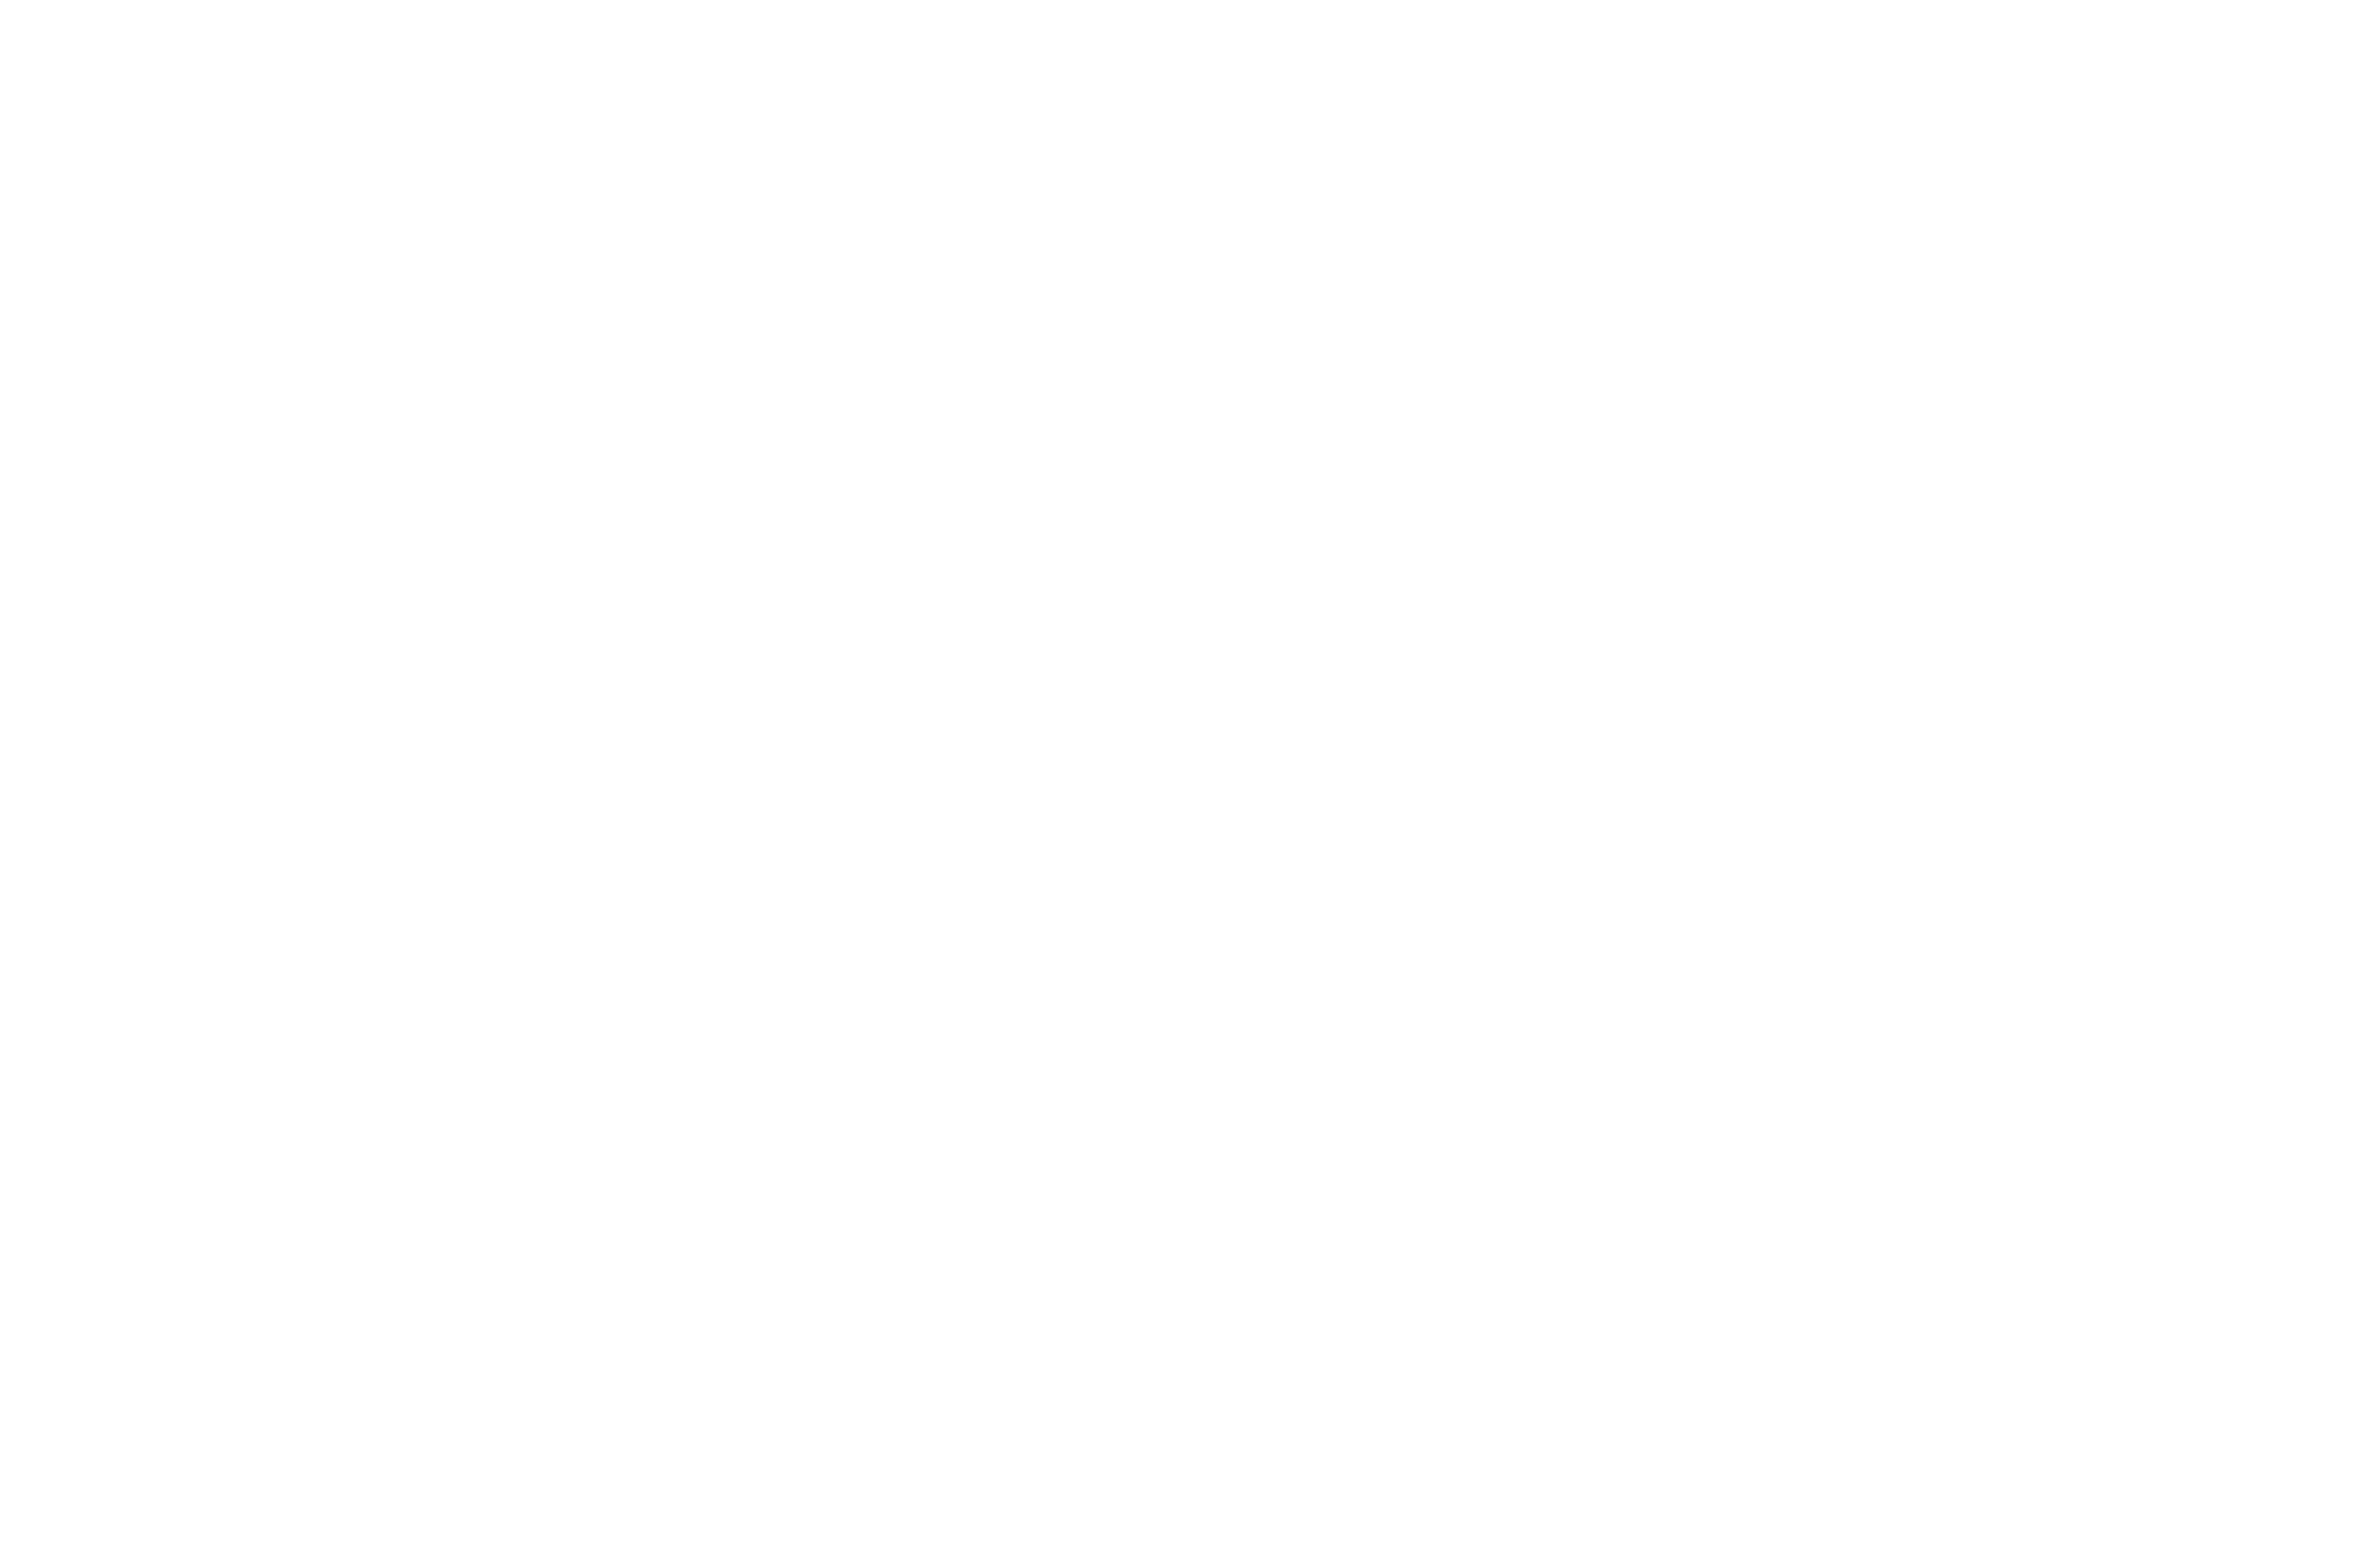 Contact Joy Homes Shelters,Senior Housing Inquiry,MHMR Housing Options,Disabled Housing Solutions,Assisted Living Information,Veteran Housing Details,Group Home Questions,Residential Care Info,Joyce@Joyhomesshelter.com,Call 909-328-9503